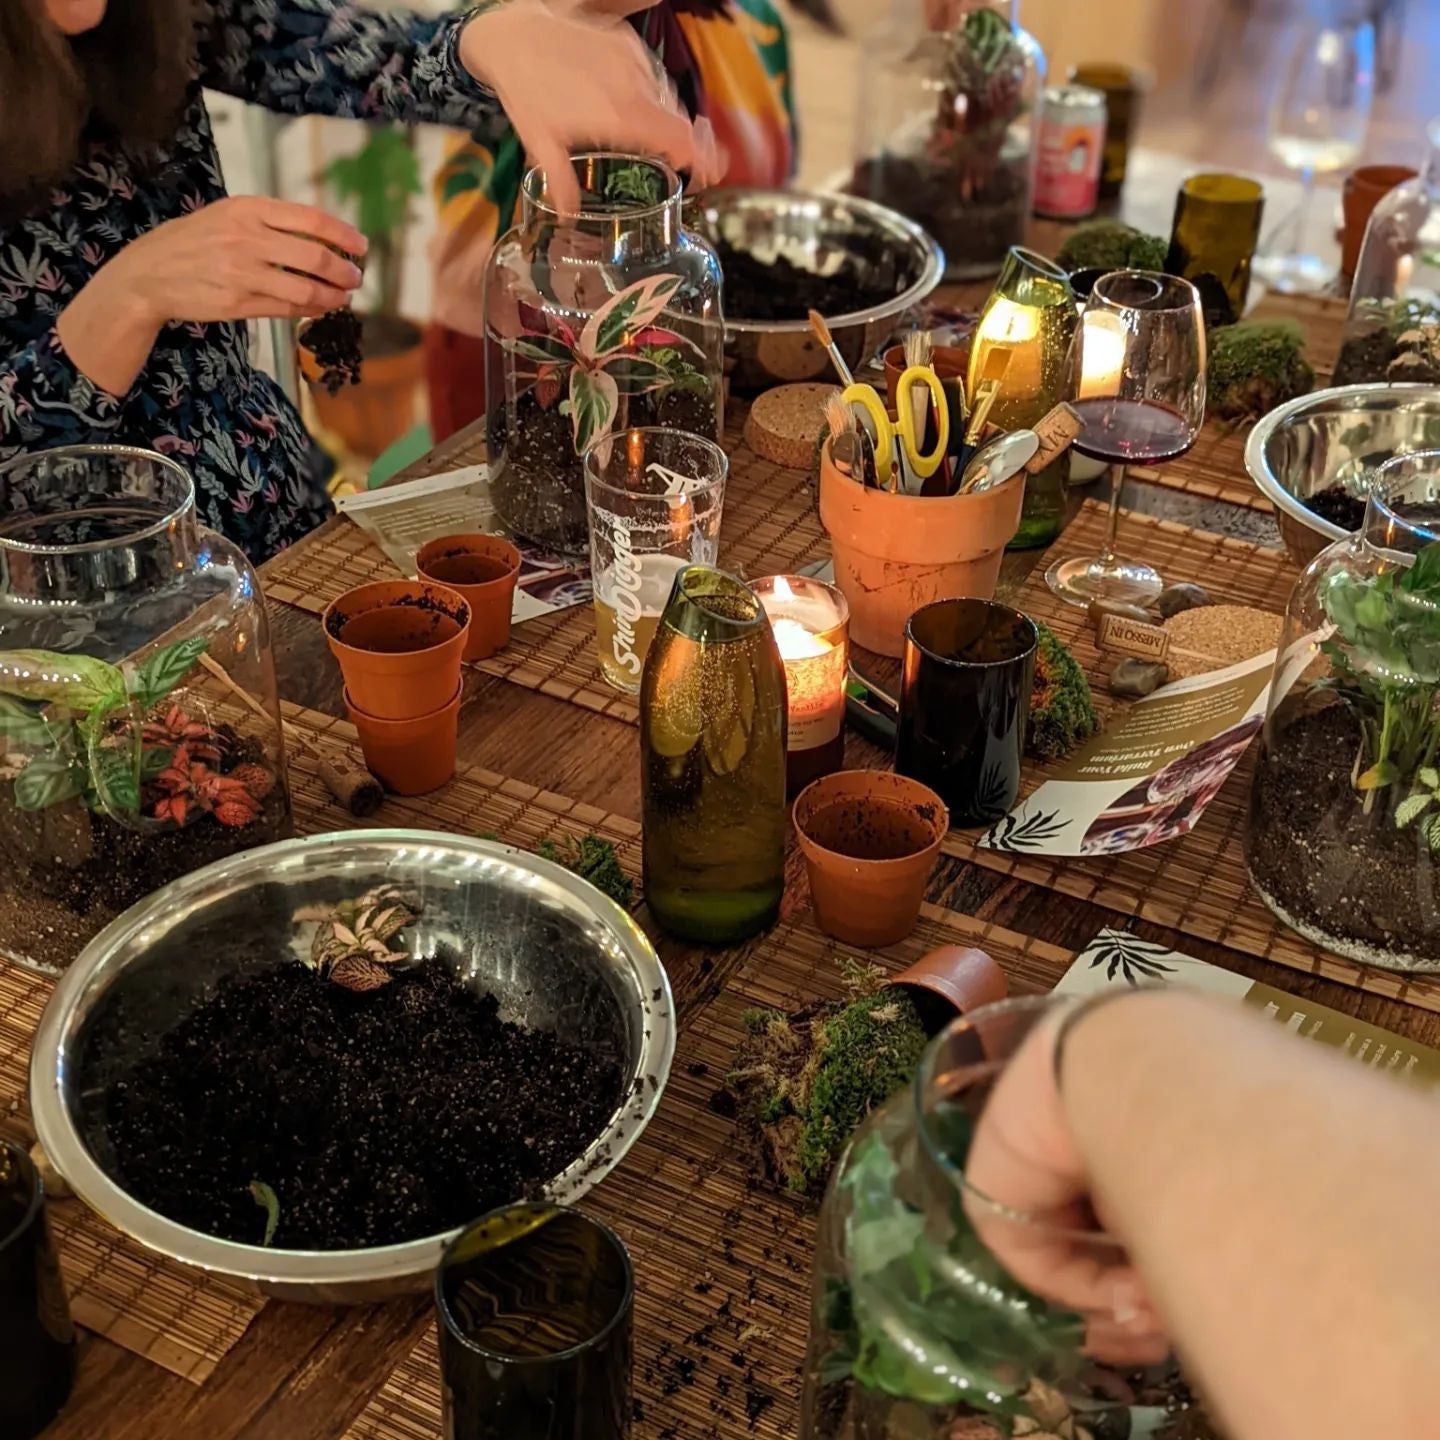 Terrarium workshop at Oats and honey Monton. Attendees creating terrariums with succulents and plants, with a candlelit background